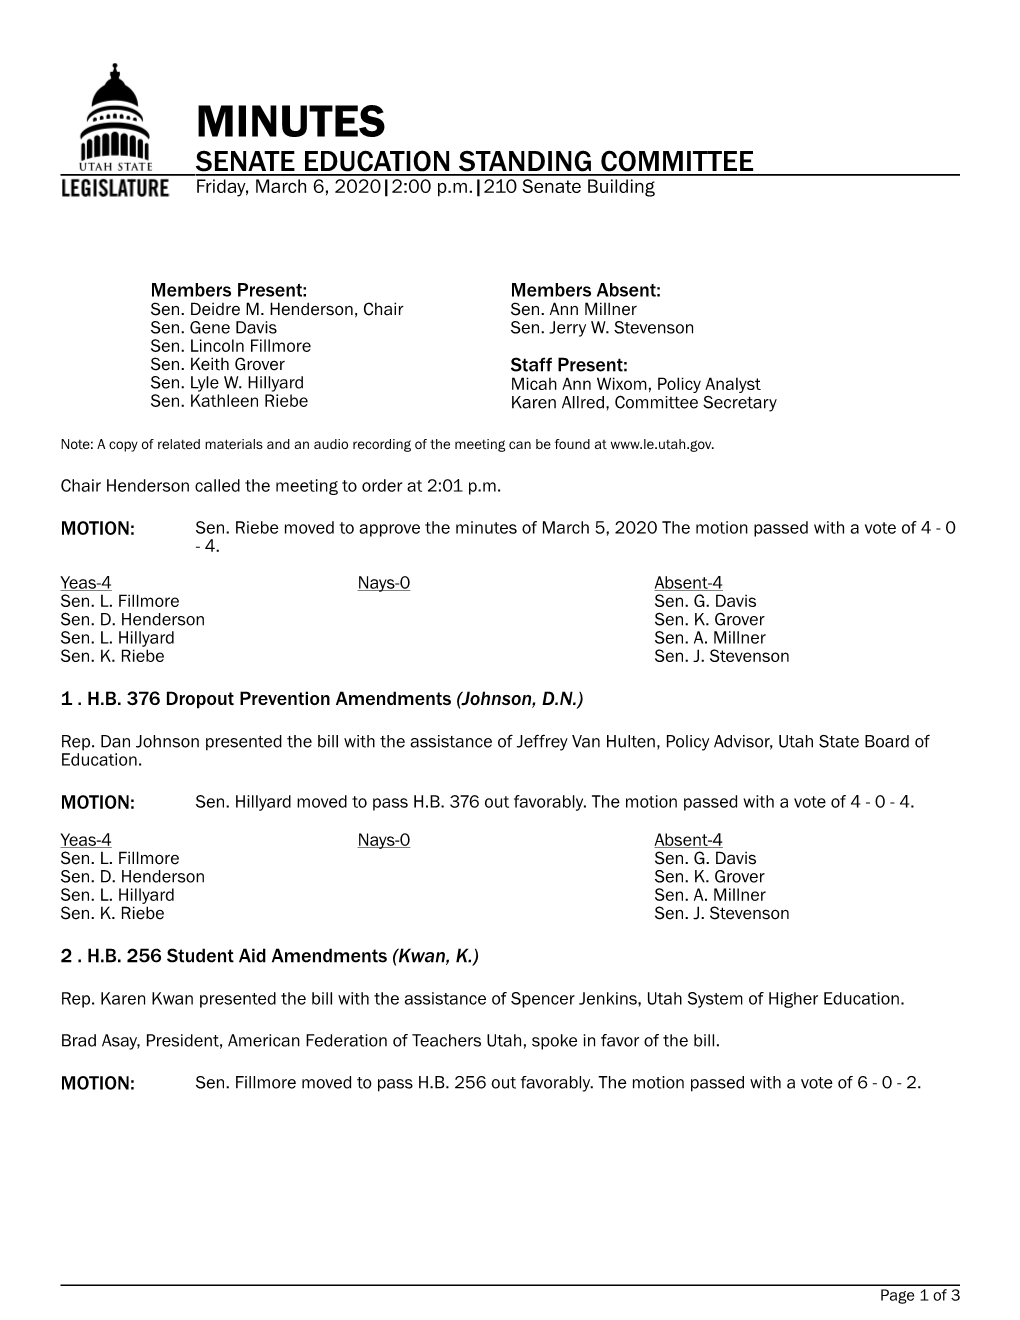 MINUTES SENATE EDUCATION STANDING COMMITTEE Friday, March 6, 2020|2:00 P.M.|210 Senate Building